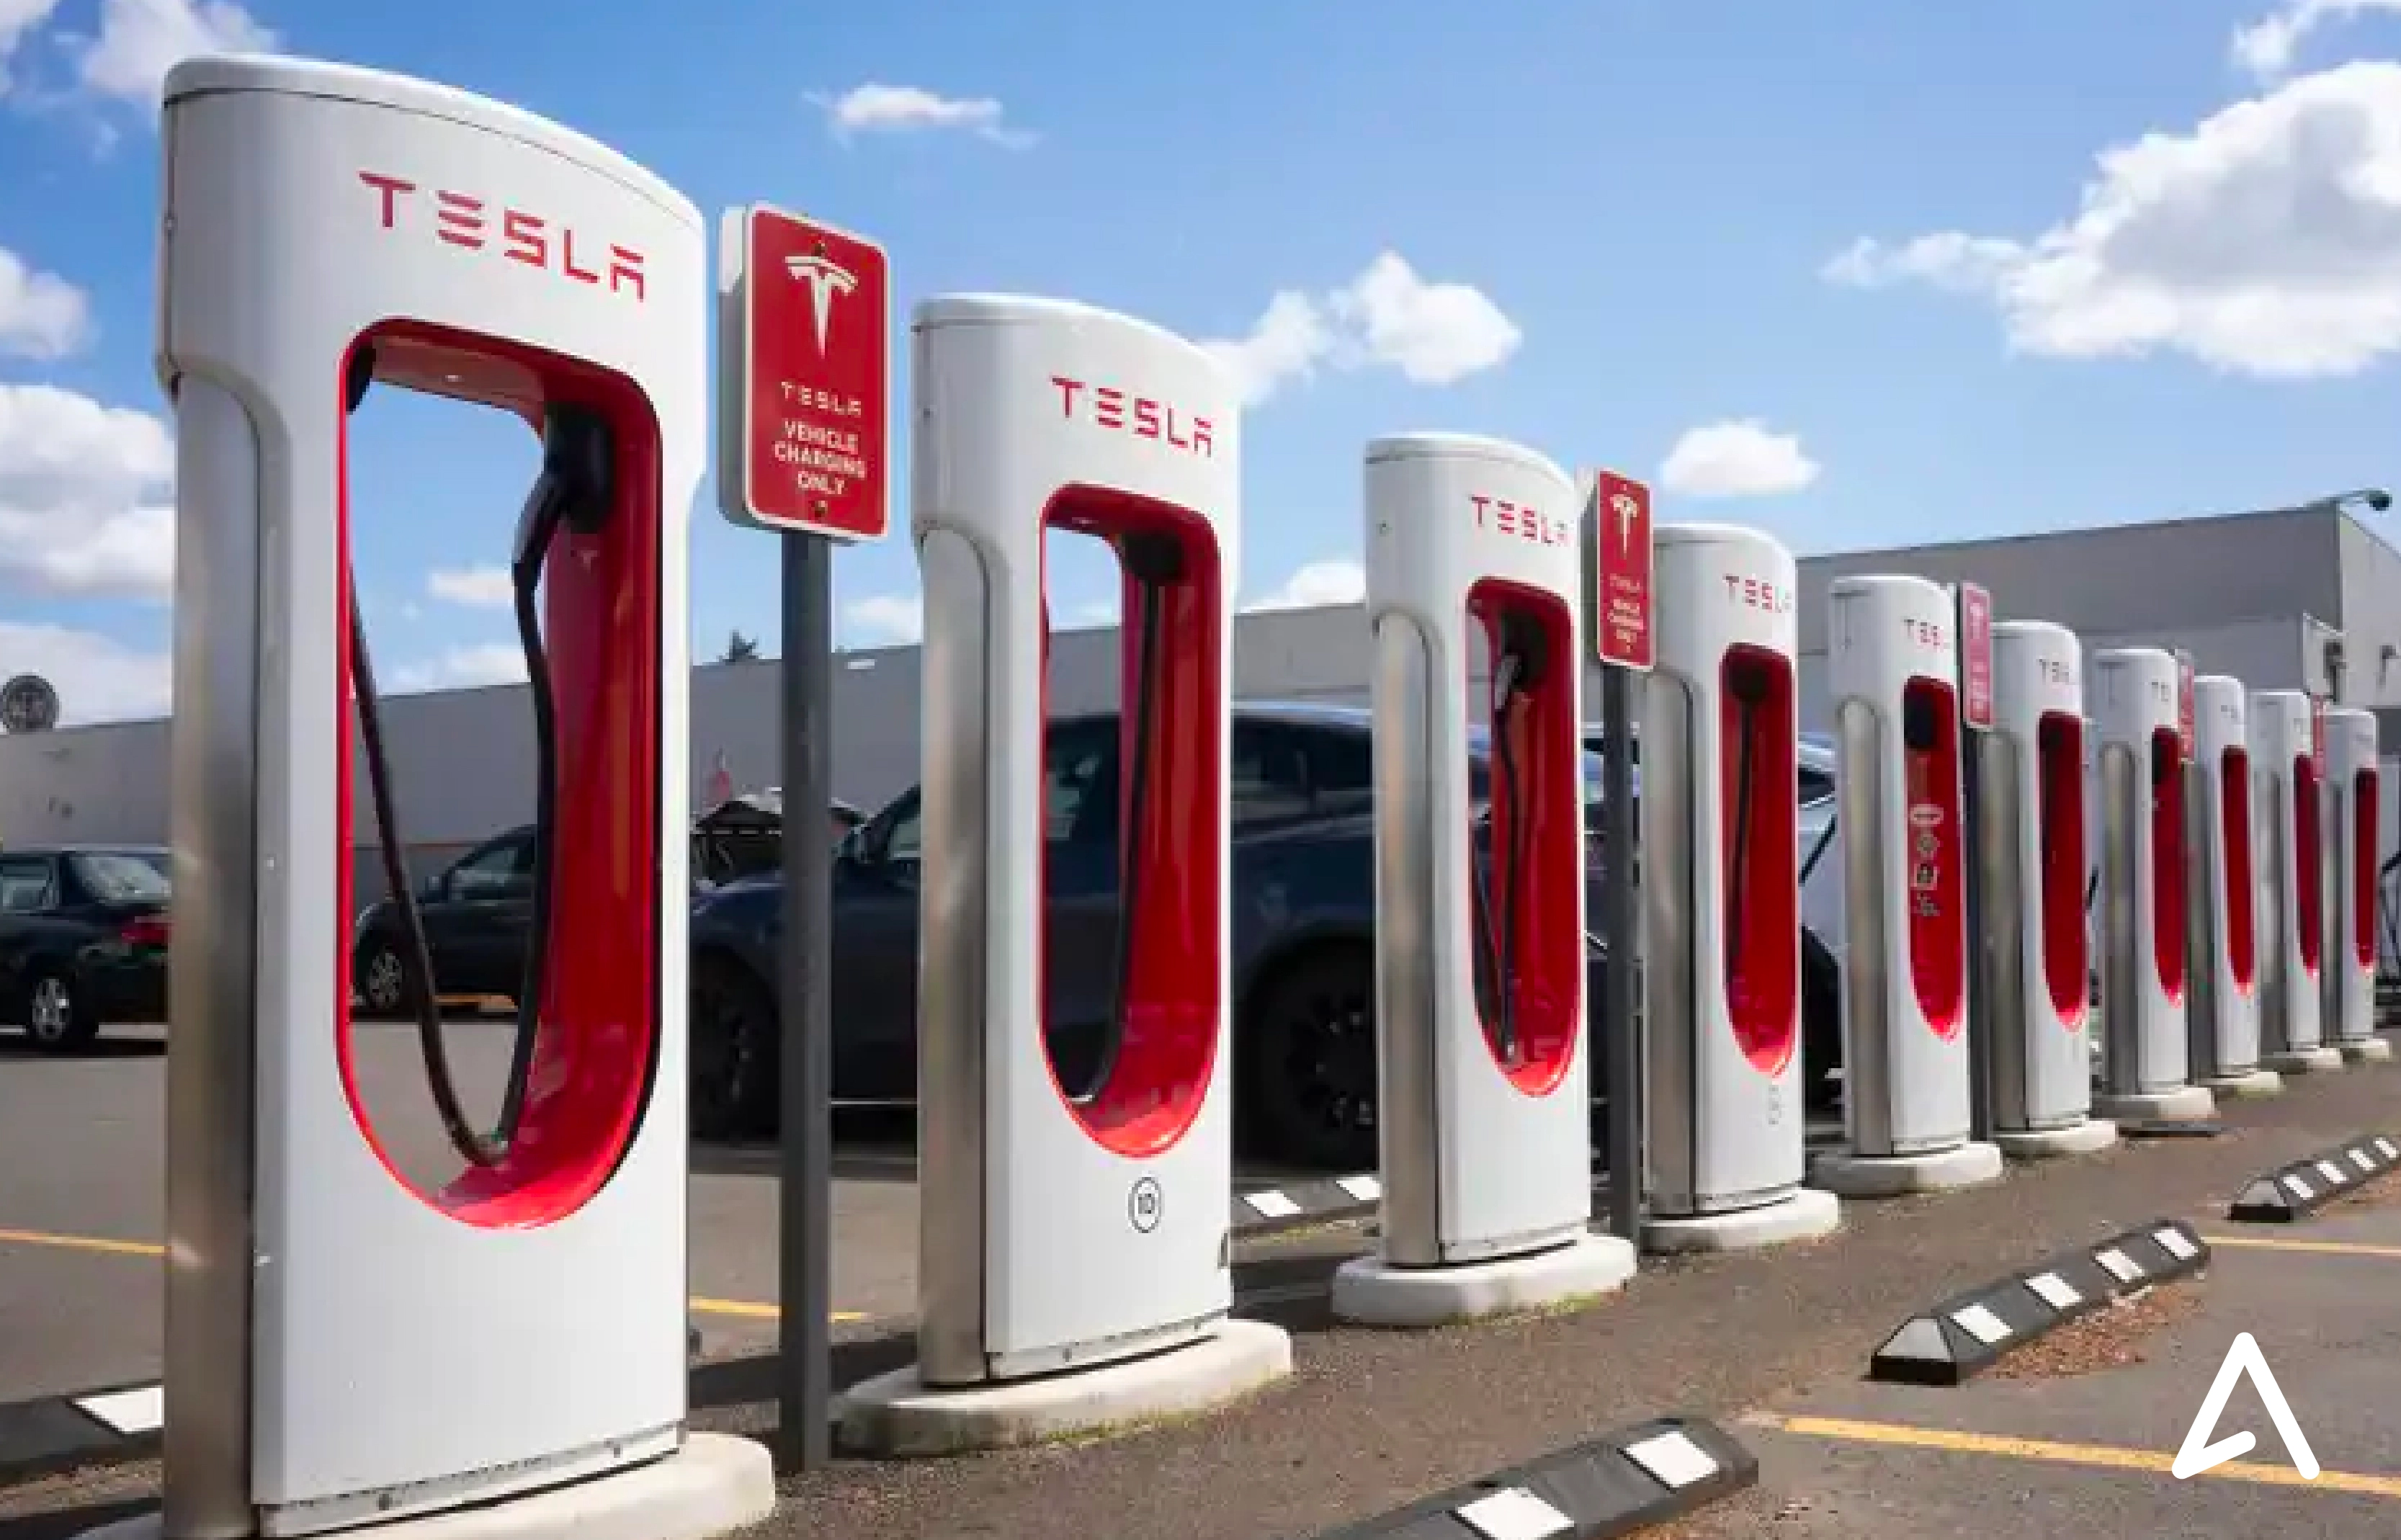 Did Tesla really lay off the whole supercharger team? Really??